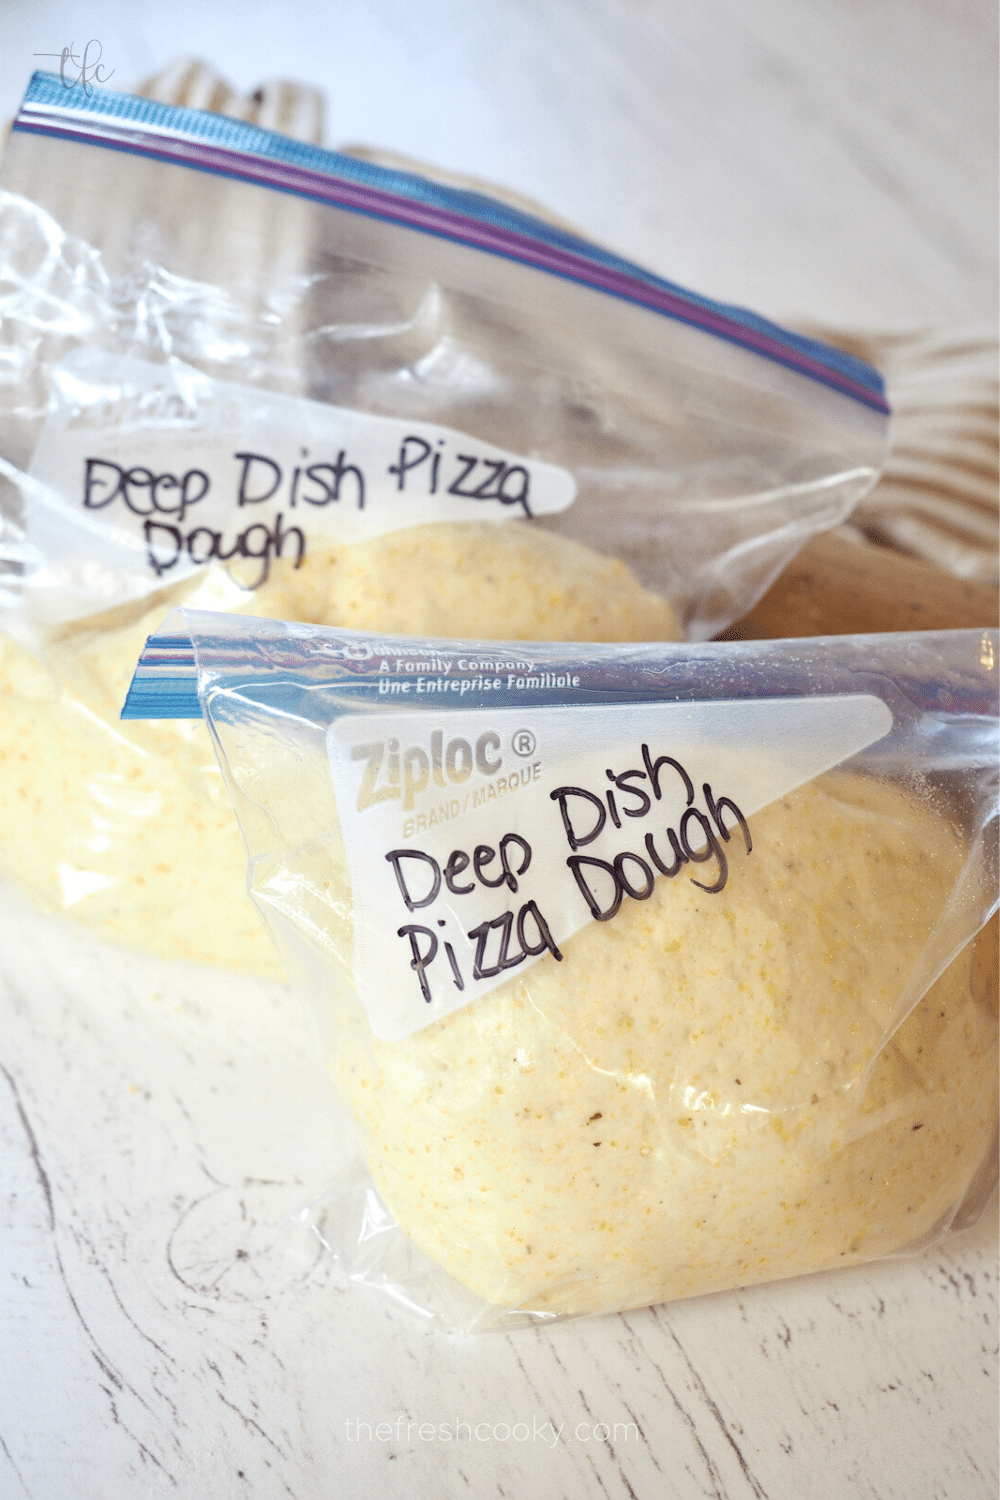 Deep Dish Pizza Dough Balls placed inside baggies for freezing.